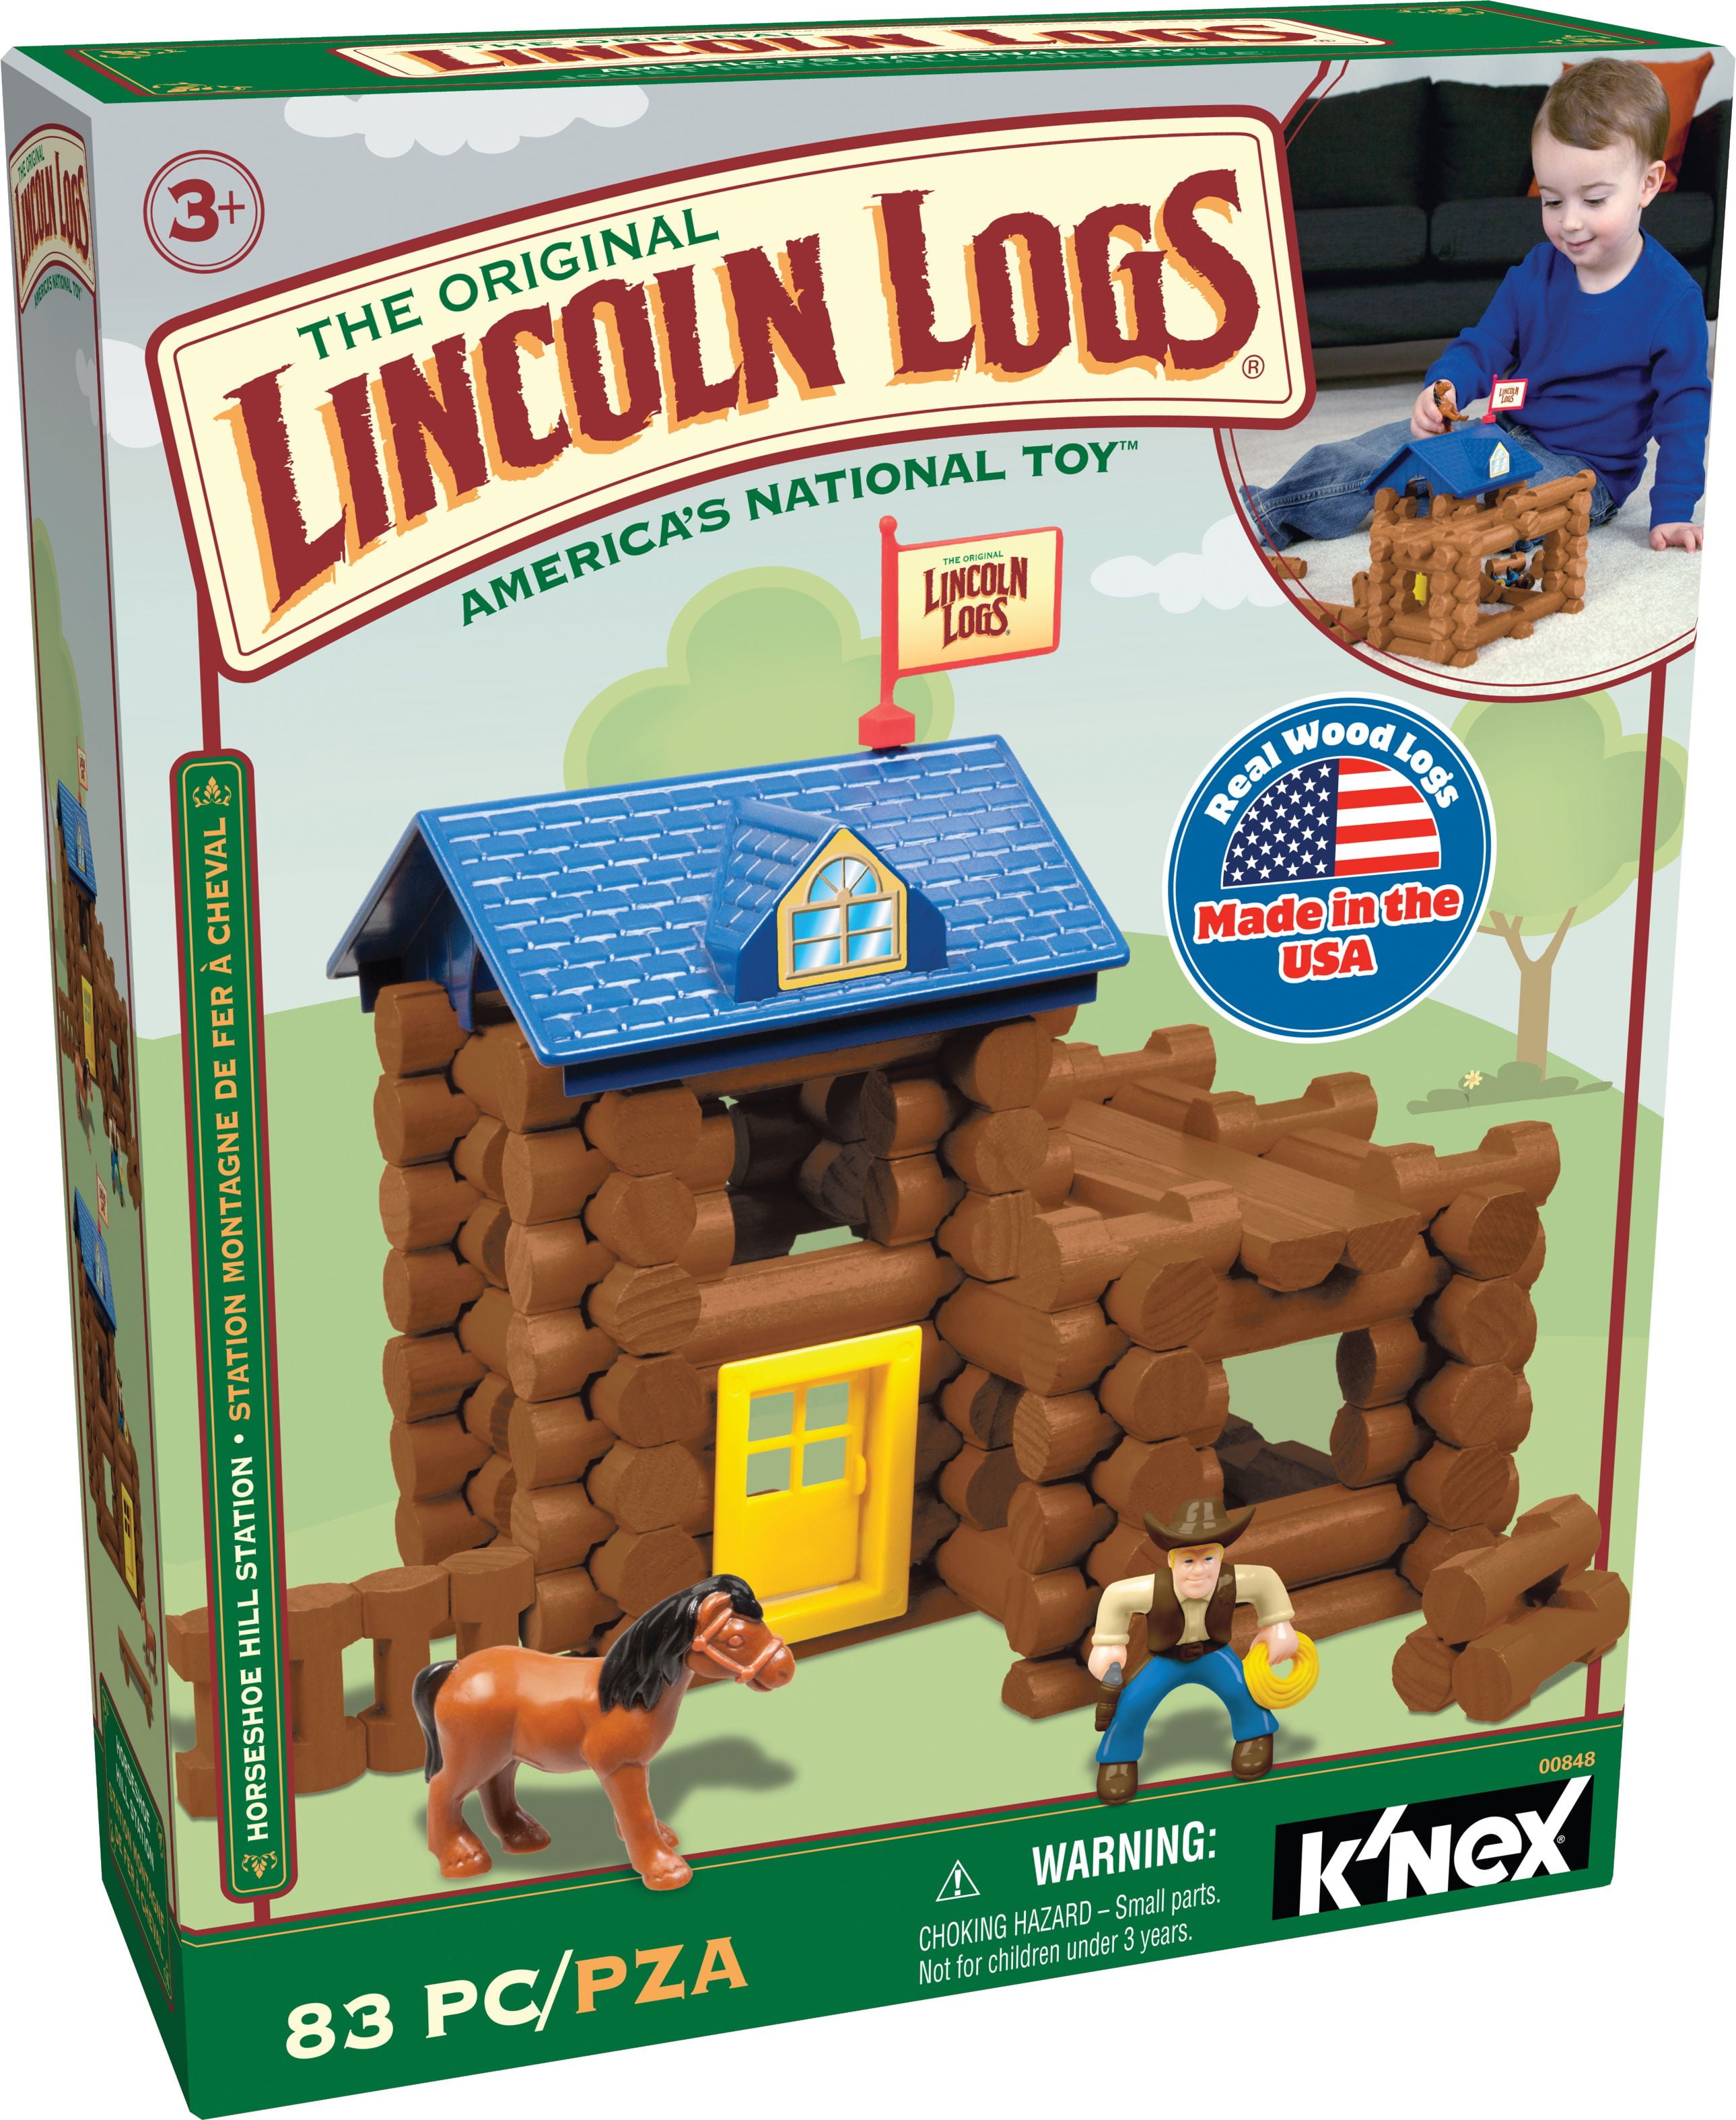 K'nex Lincoln Logs 00854 100th Anniversary Tin Building Set Ages 3 for sale online 